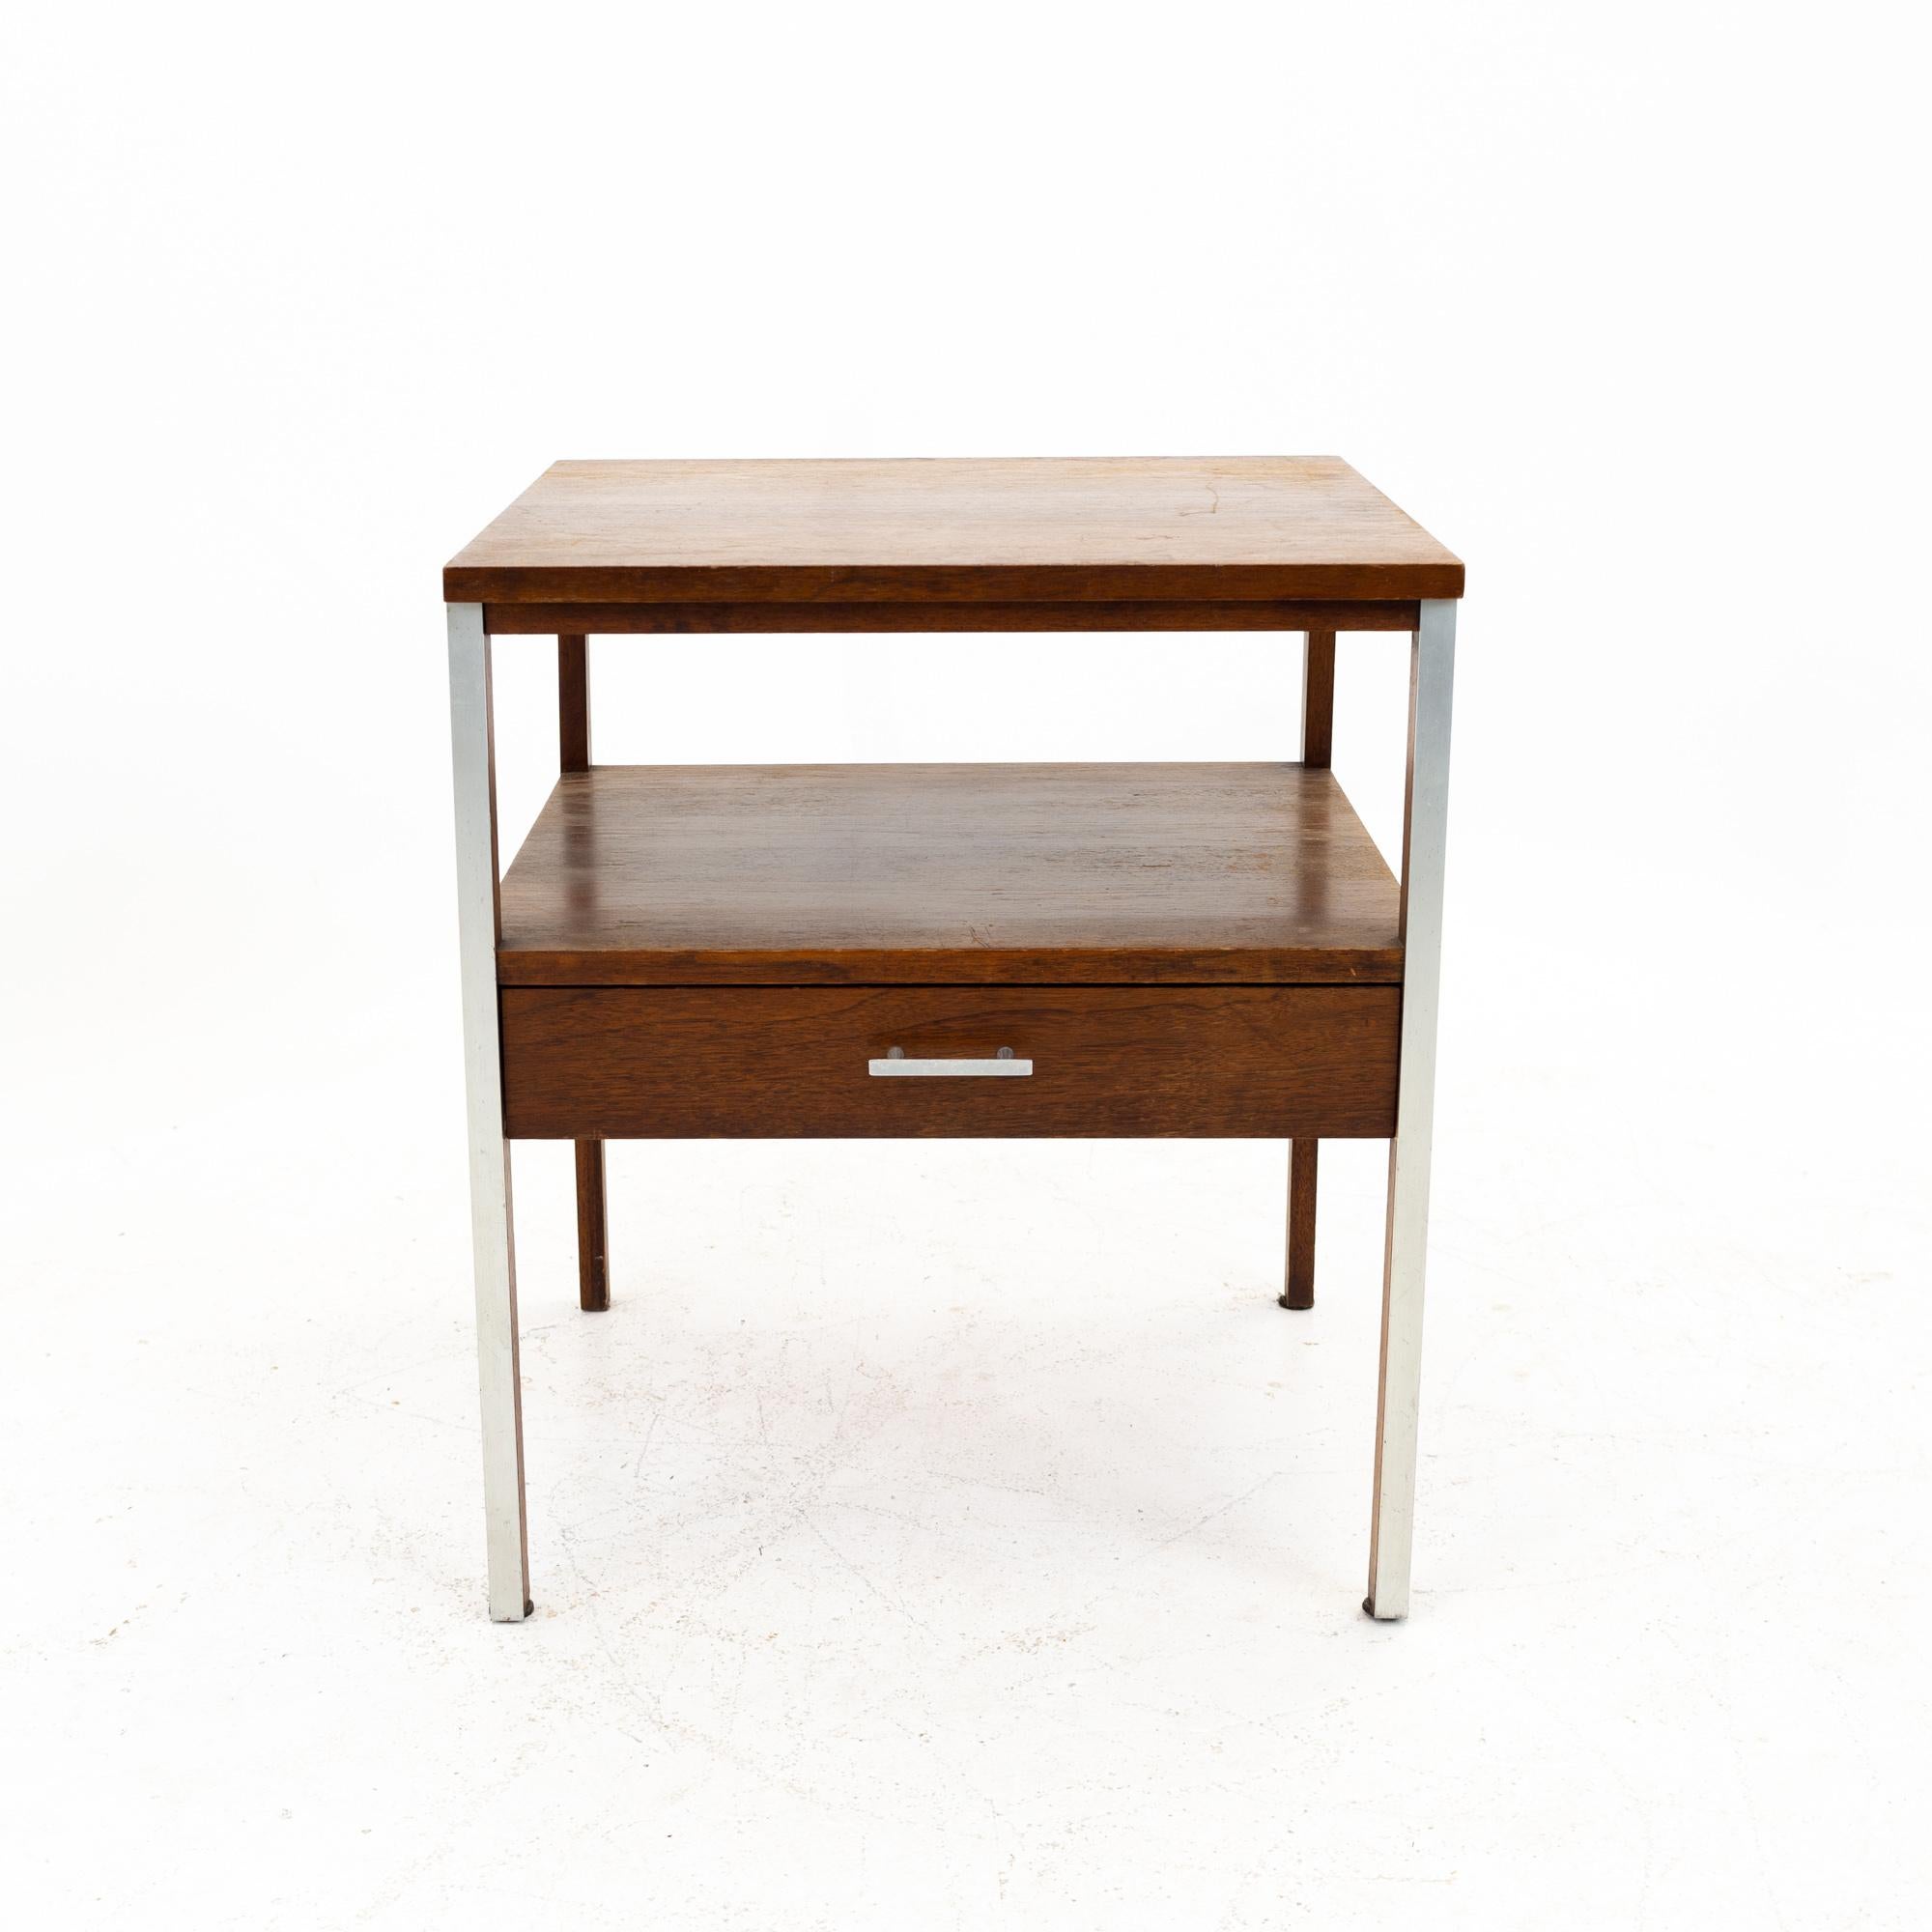 Paul McCobb for calvin linear mid century side end table

This table is 21.5 wide x 21.5 deep x 24.5 inches tall

All pieces of furniture can be had in what we call restored vintage condition. That means the piece is restored upon purchase so